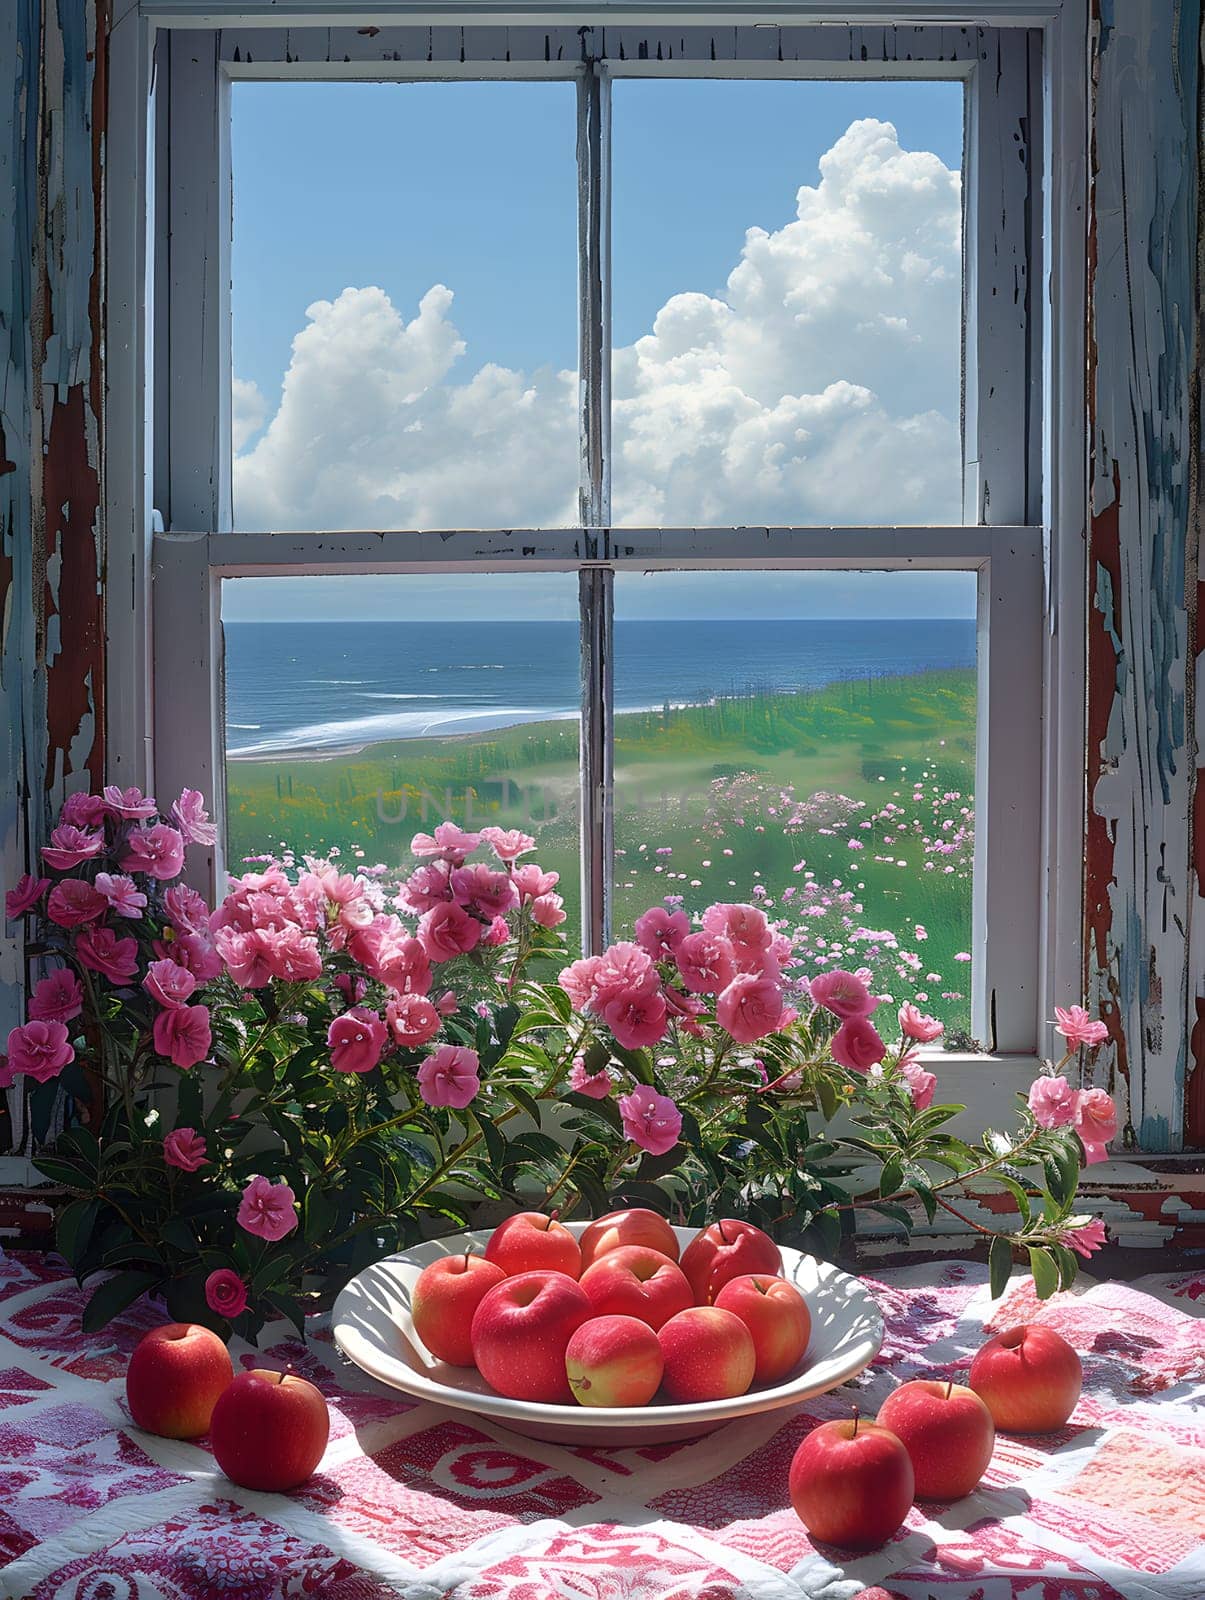 A bowl of apples on a dishware by the window with an ocean view by Nadtochiy